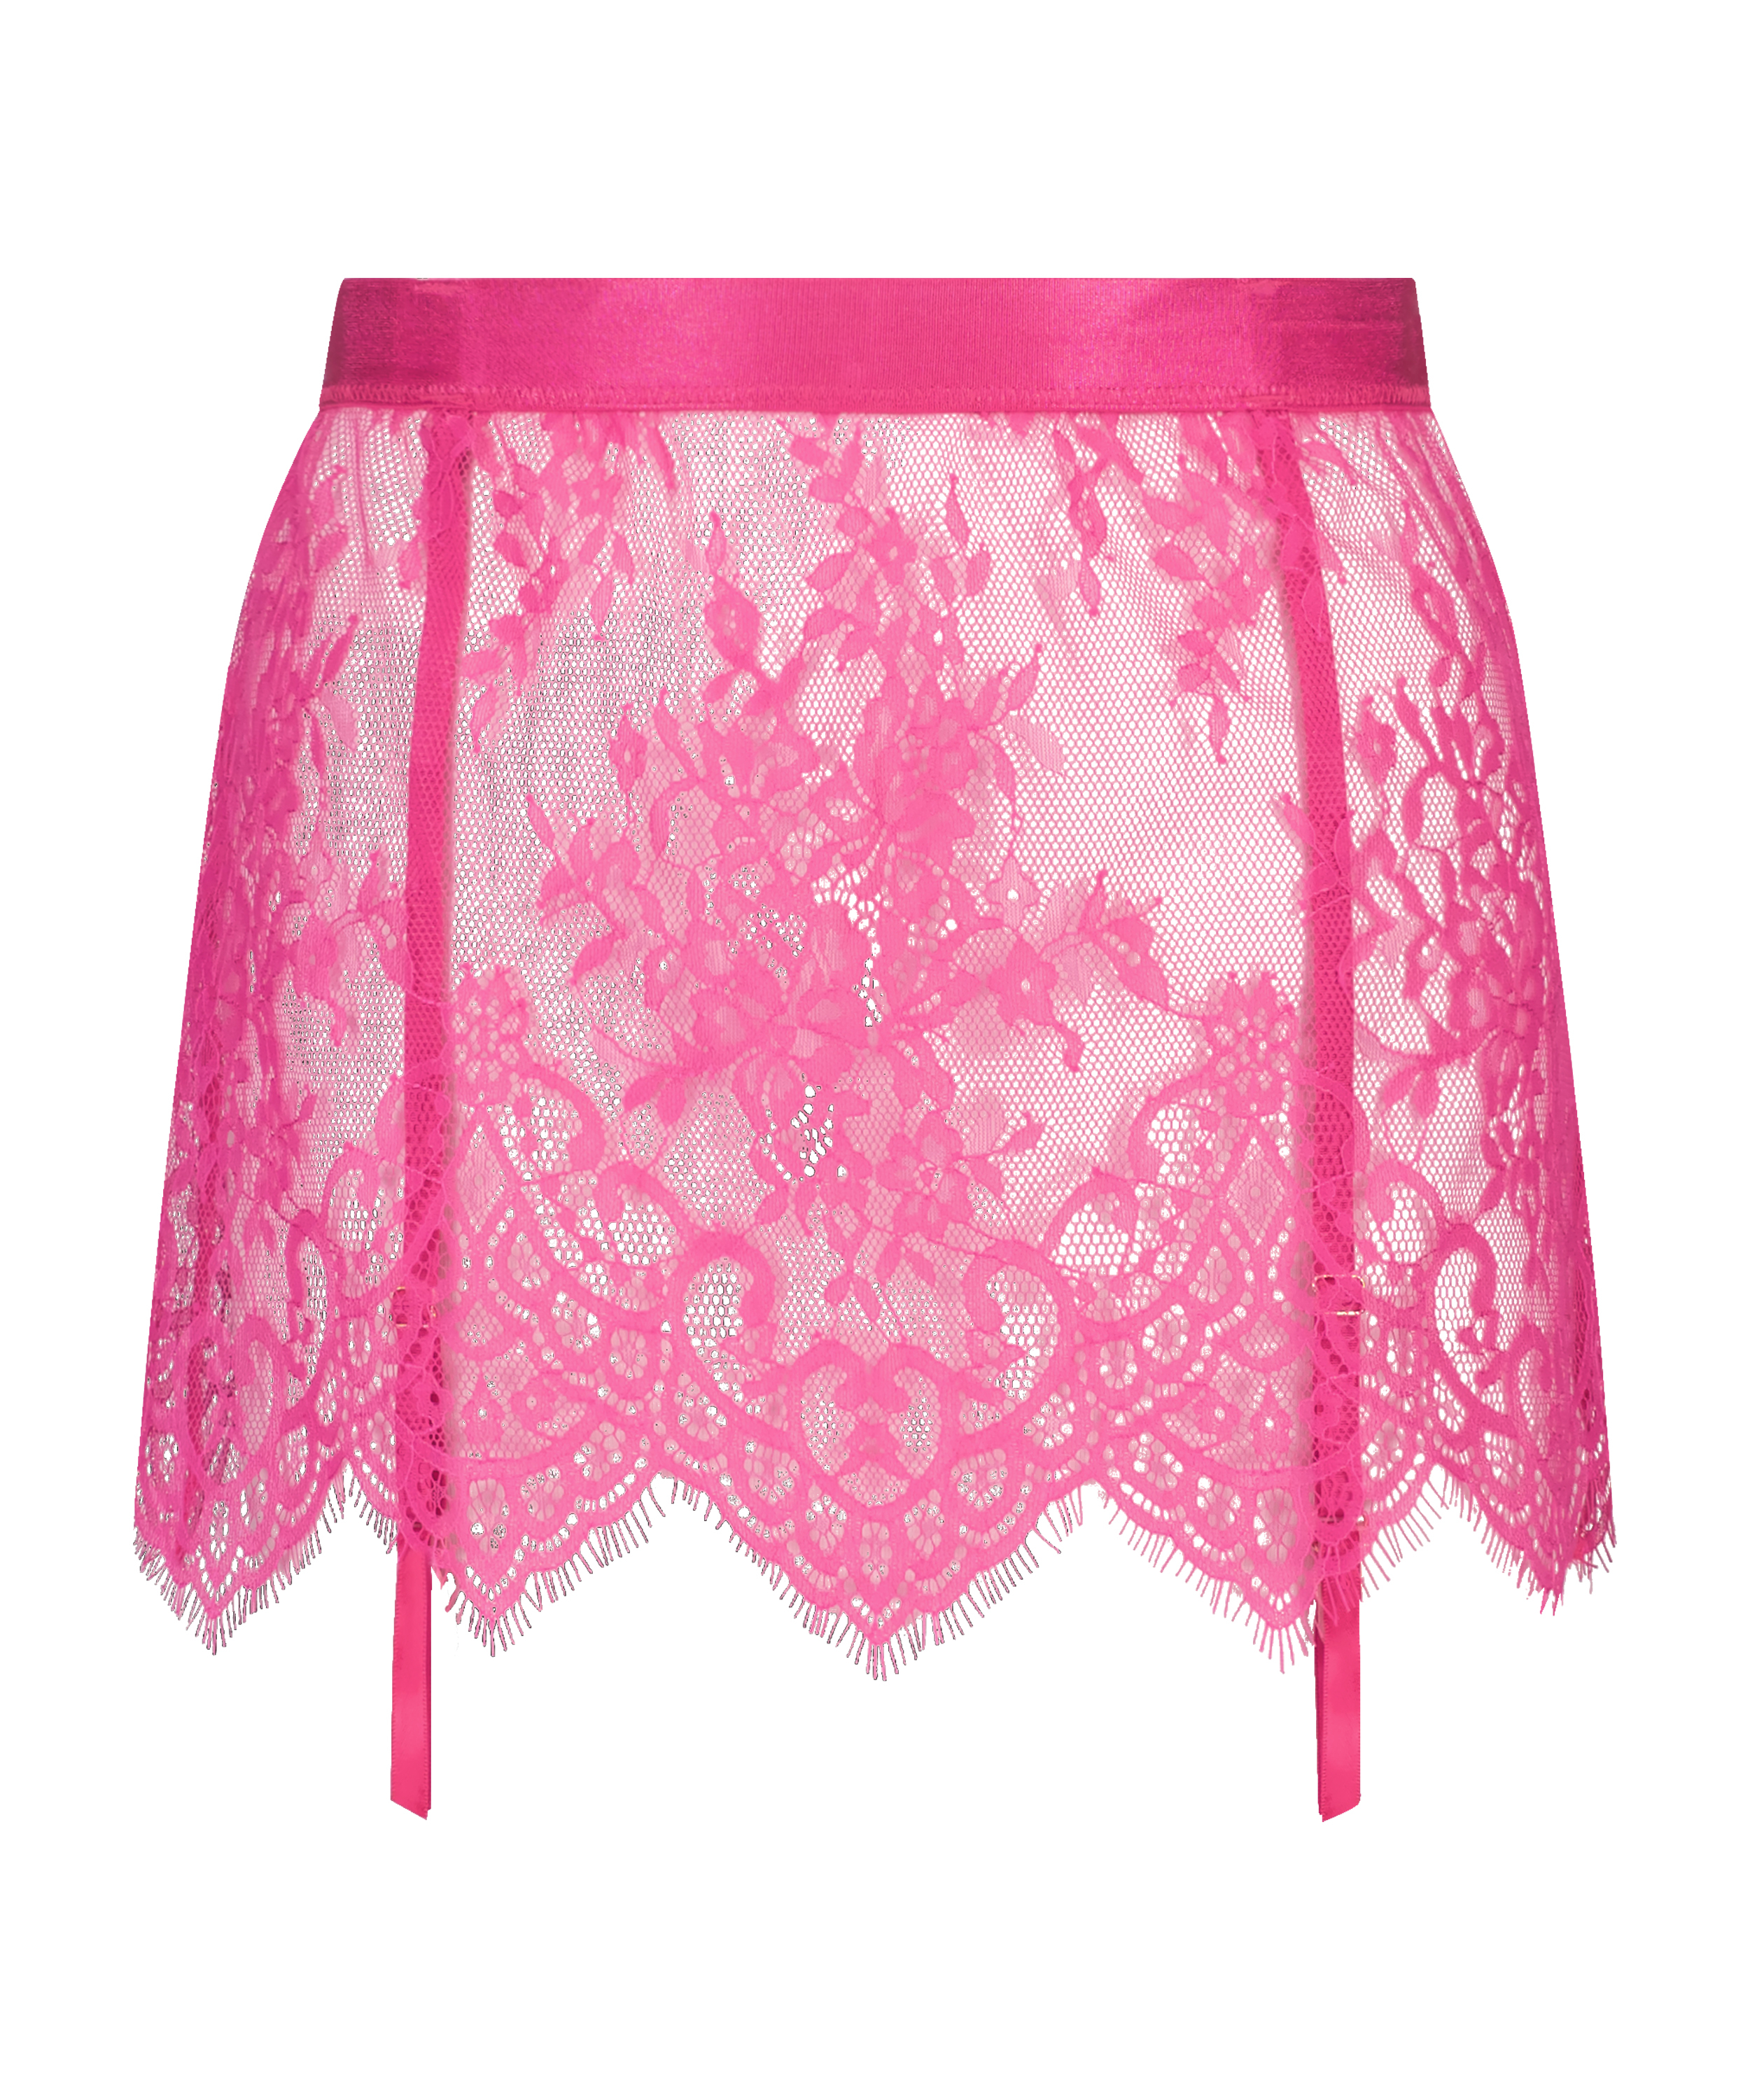 Nederdel Lace, pink, main